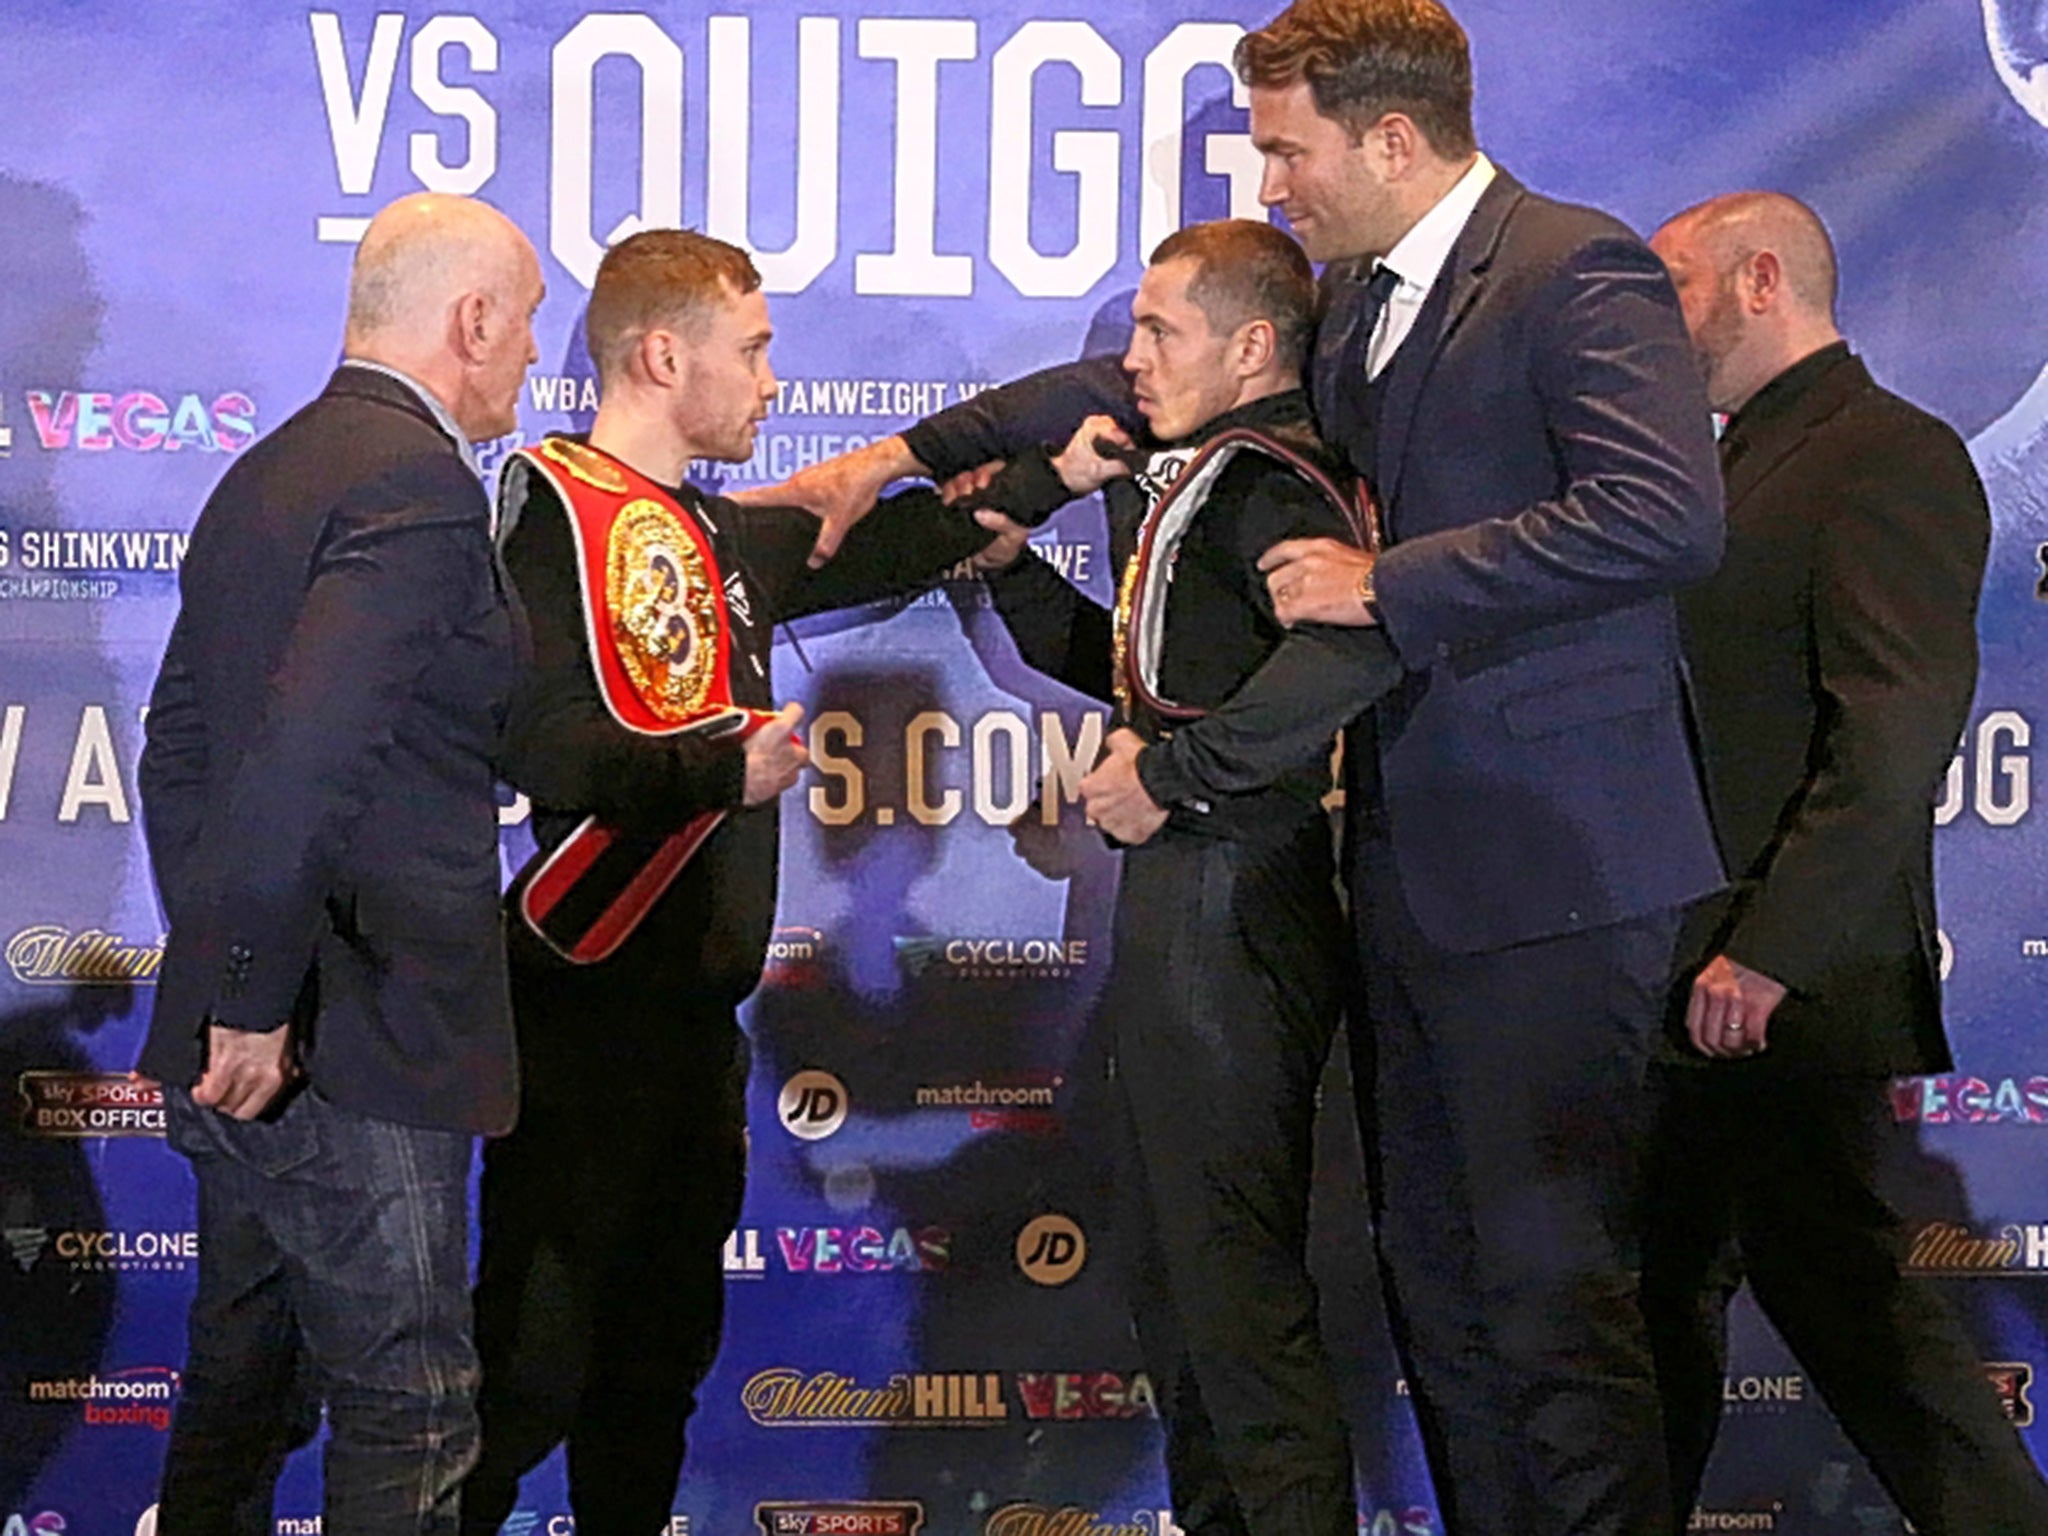 Carl Frampton (centre left) and Scott Quigg square off after the press conference in Manchester